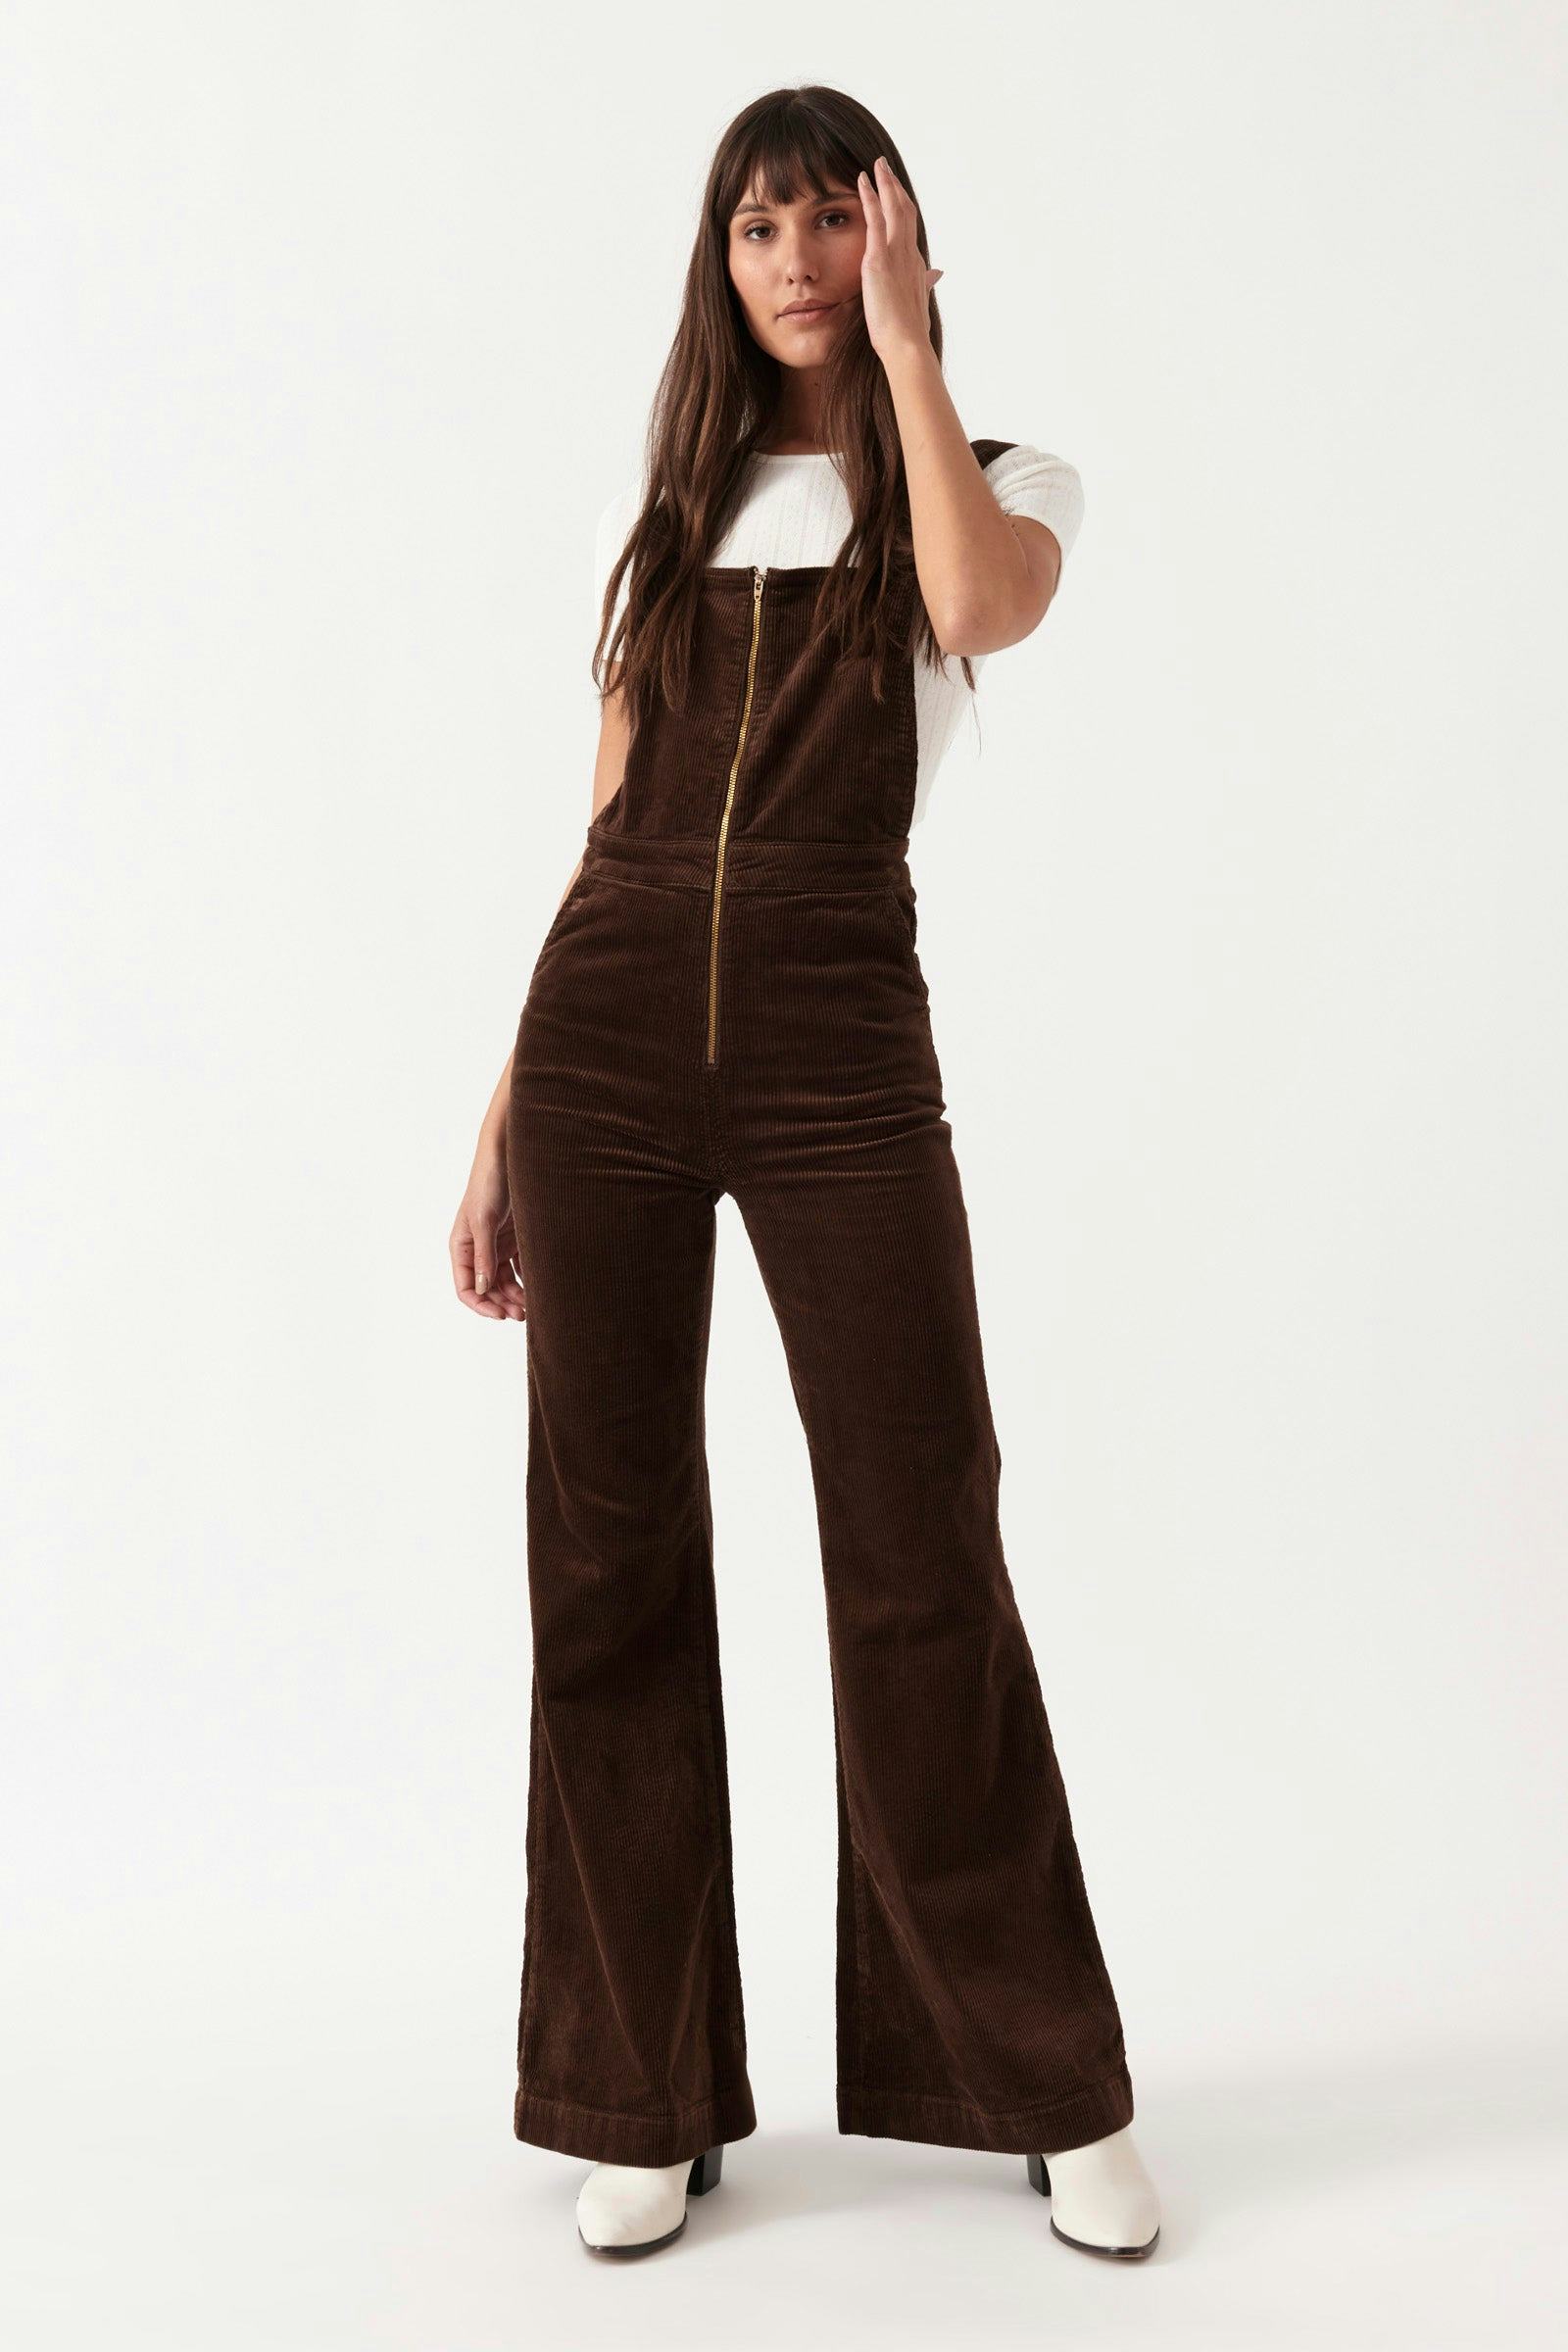 Buy Eastcoast Flare Overall - Brown Cord Online